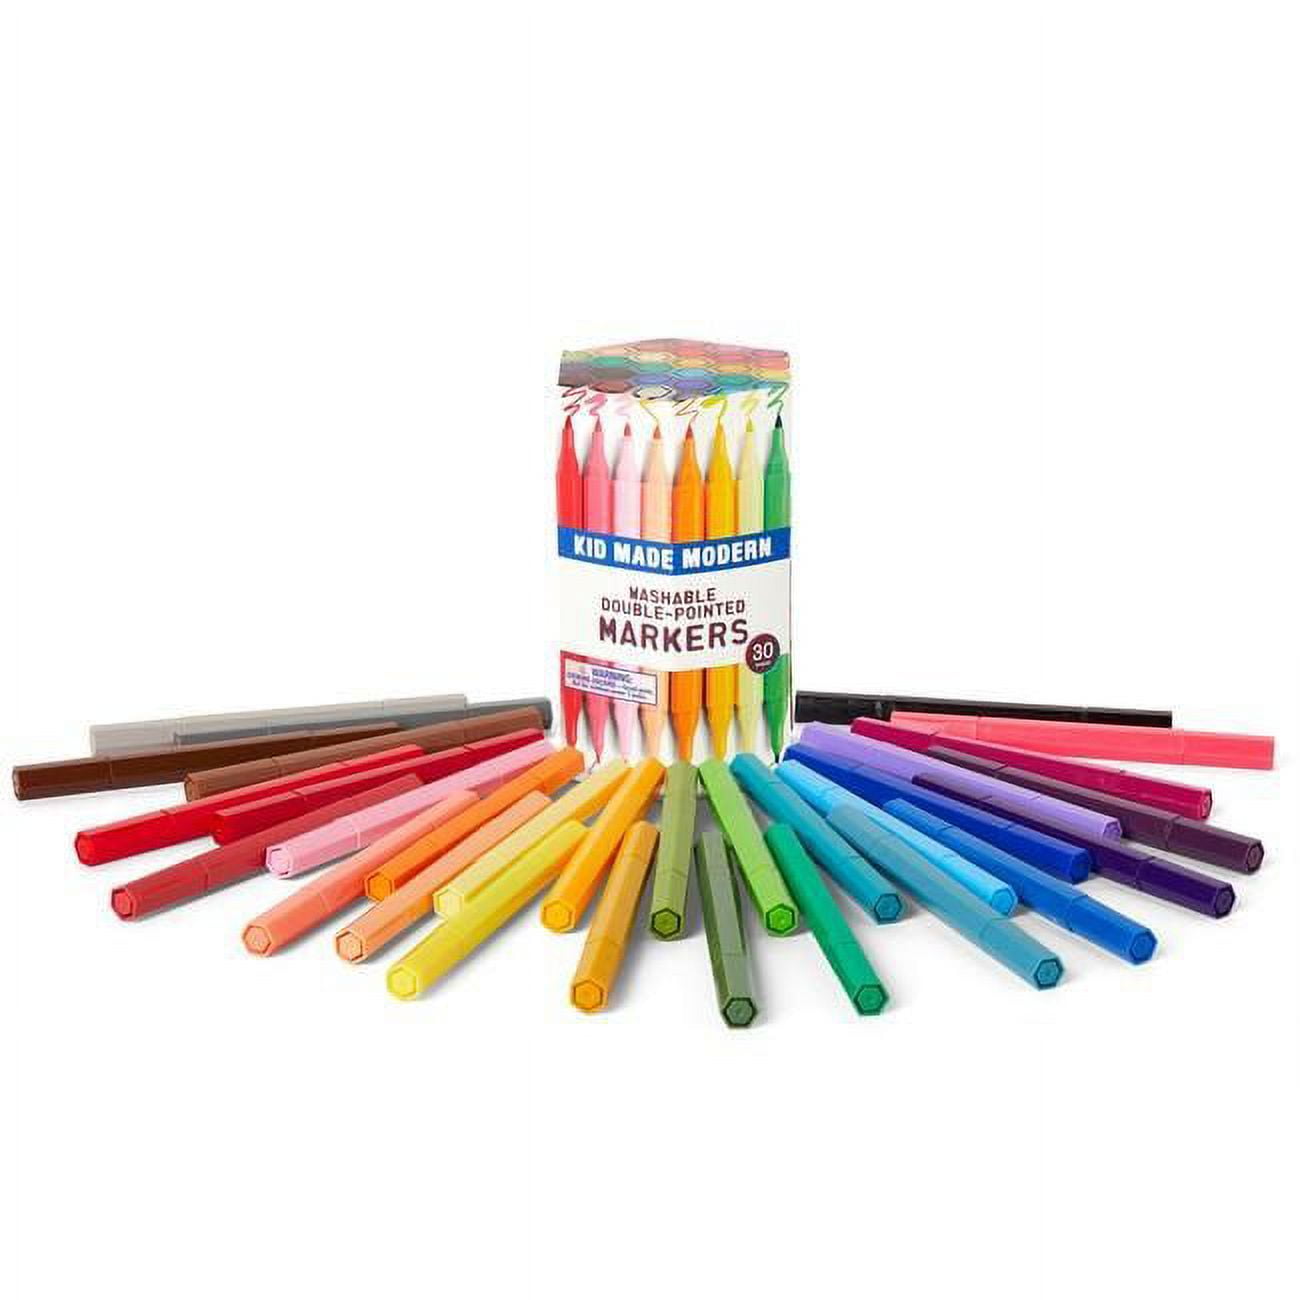 Washable Double-pointed Markers (15 count)